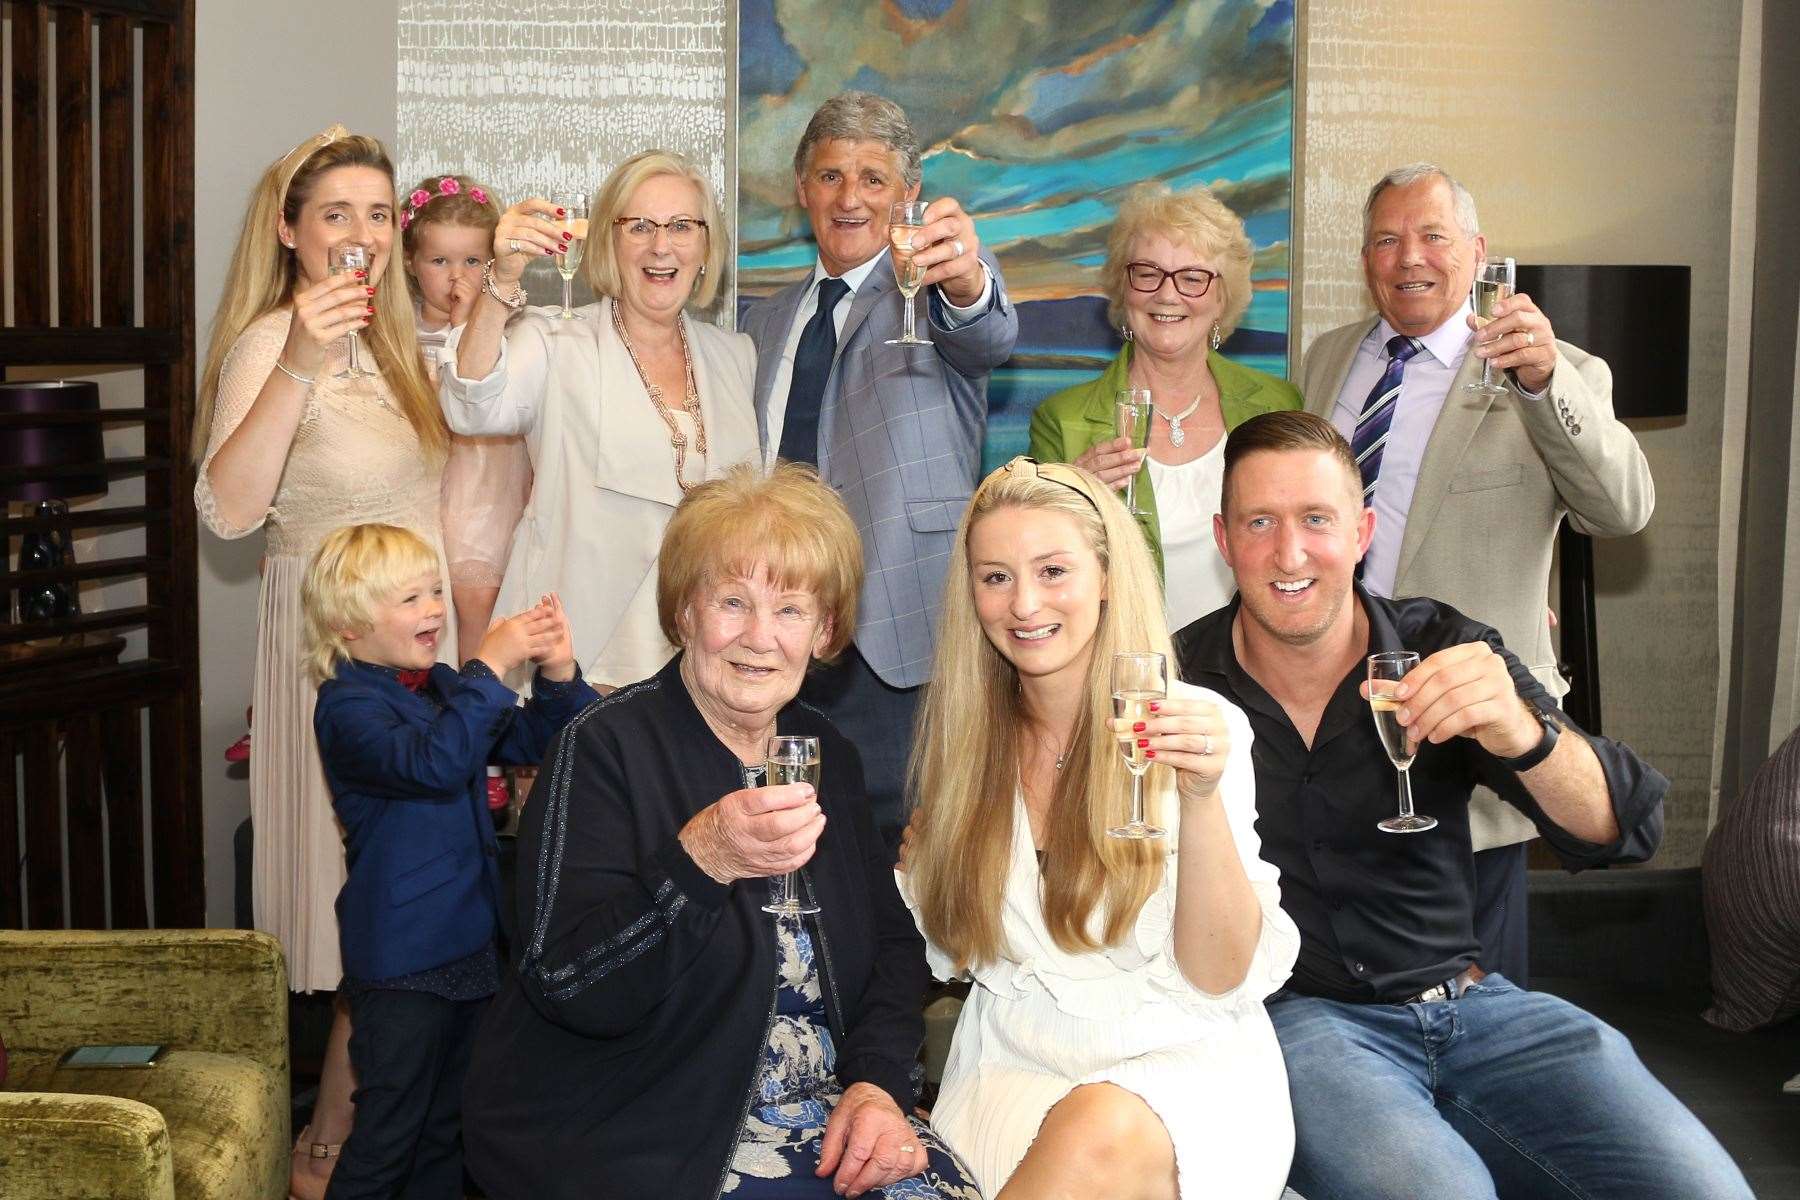 The family celebrate the 90th birthday of Mabel Butler and the surprise engagement of Hanna Lara Kay and Nick Blair. Picture: Andy Taylor